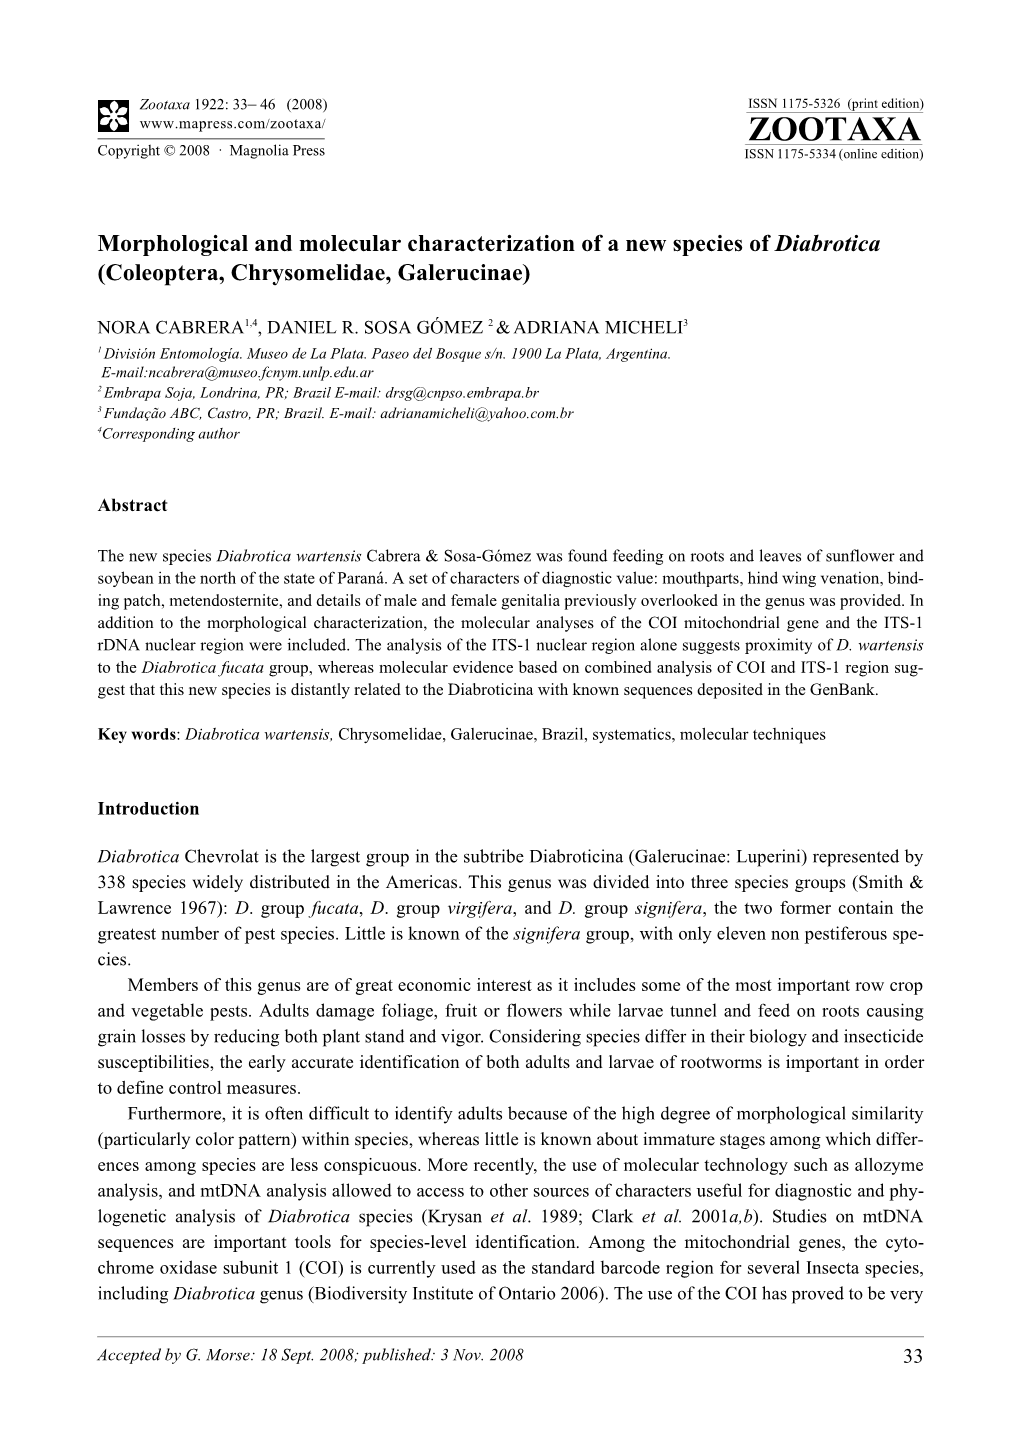 Zootaxa, Morphological and Molecular Characterization of a New Species of Diabrotica (Coleoptera, Chrysomelidae, Galerucinae)